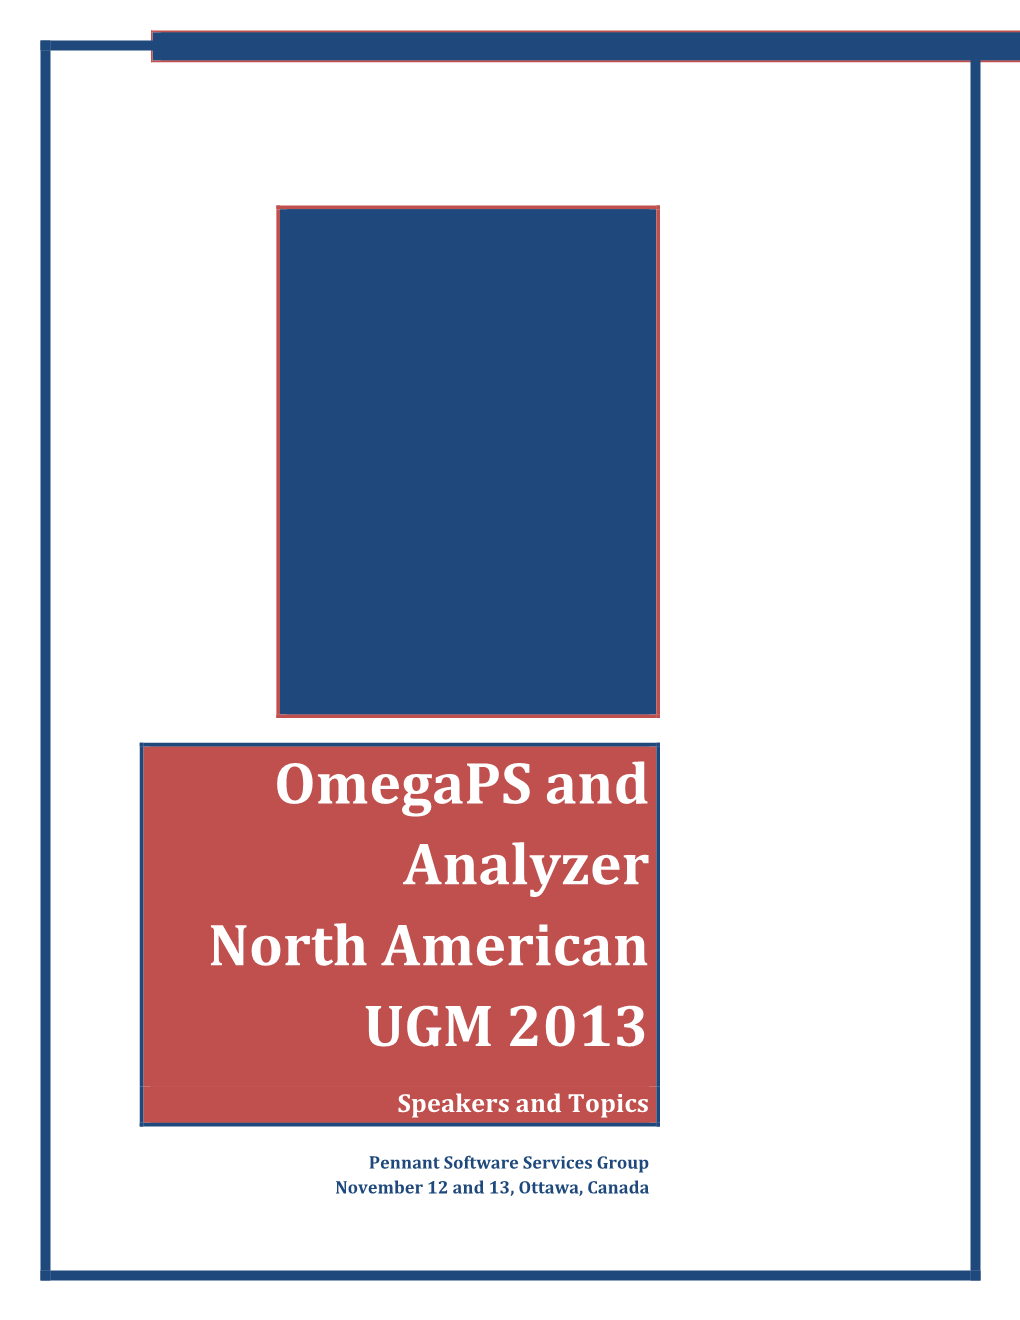 Omegaps and Analyzer North American UGM 2013